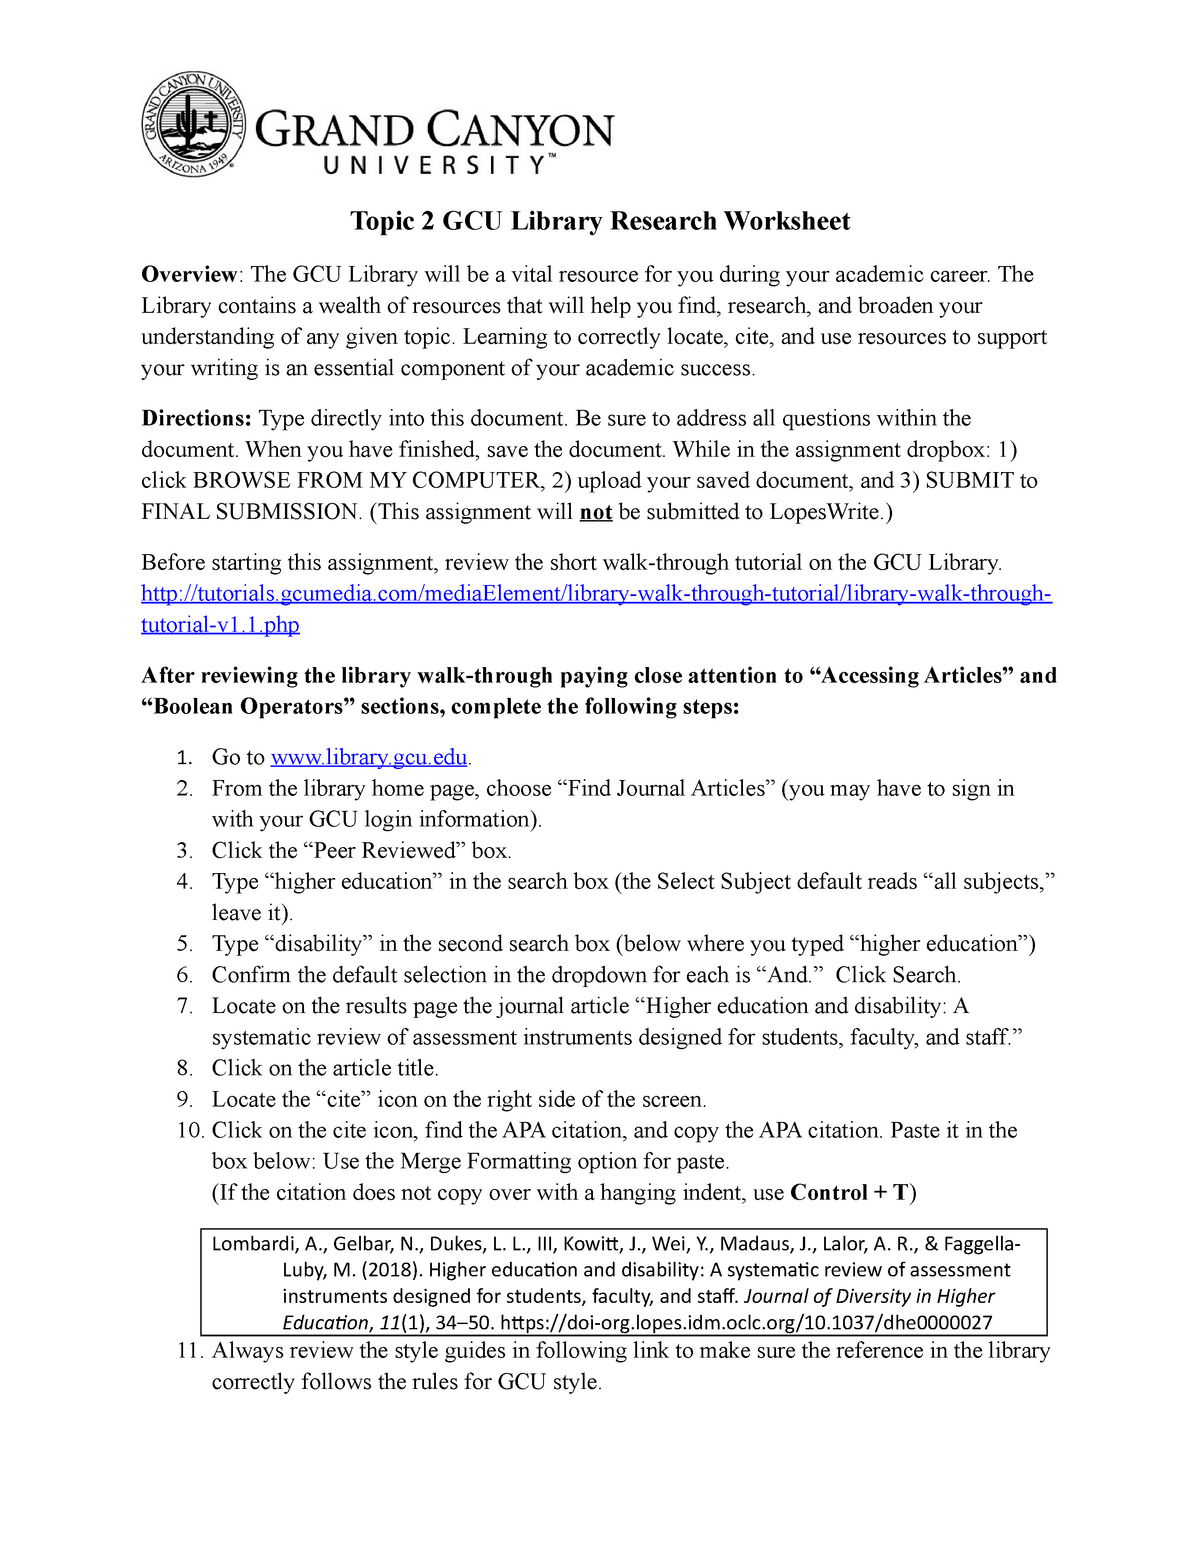 UNV103 T2 Research Assignment Topic 2 GCU Library Research Worksheet